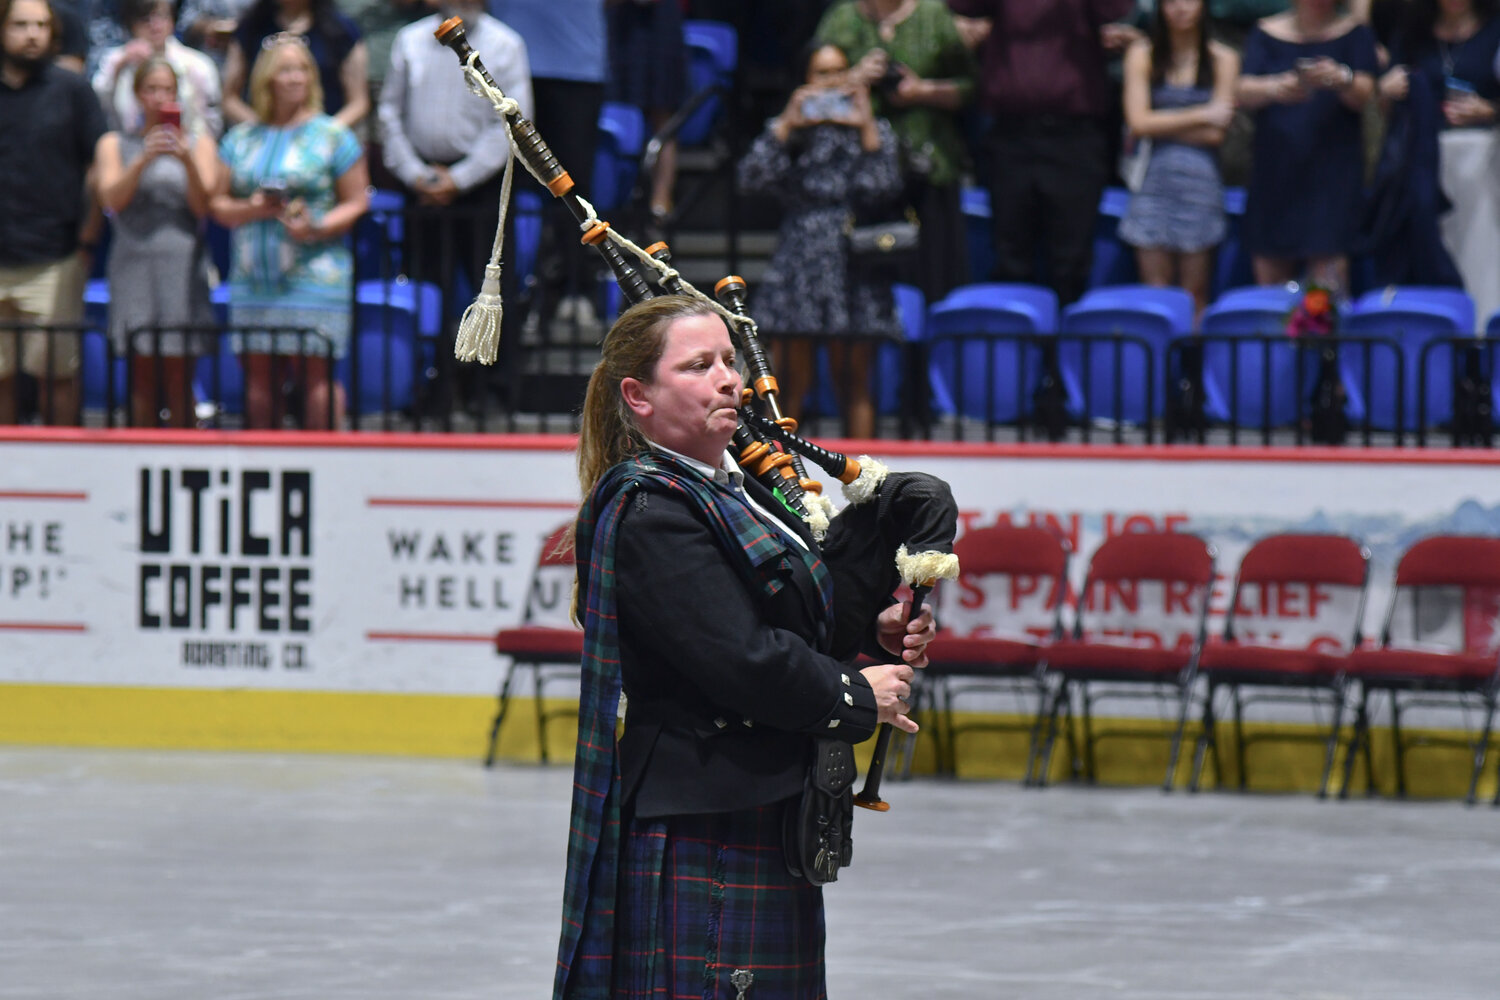 As is Utica University tradition, bagpipes are played at the beginning of the undergraduate commencement ceremony to bring out the university's administration and faculty before welcoming in the graduating class.